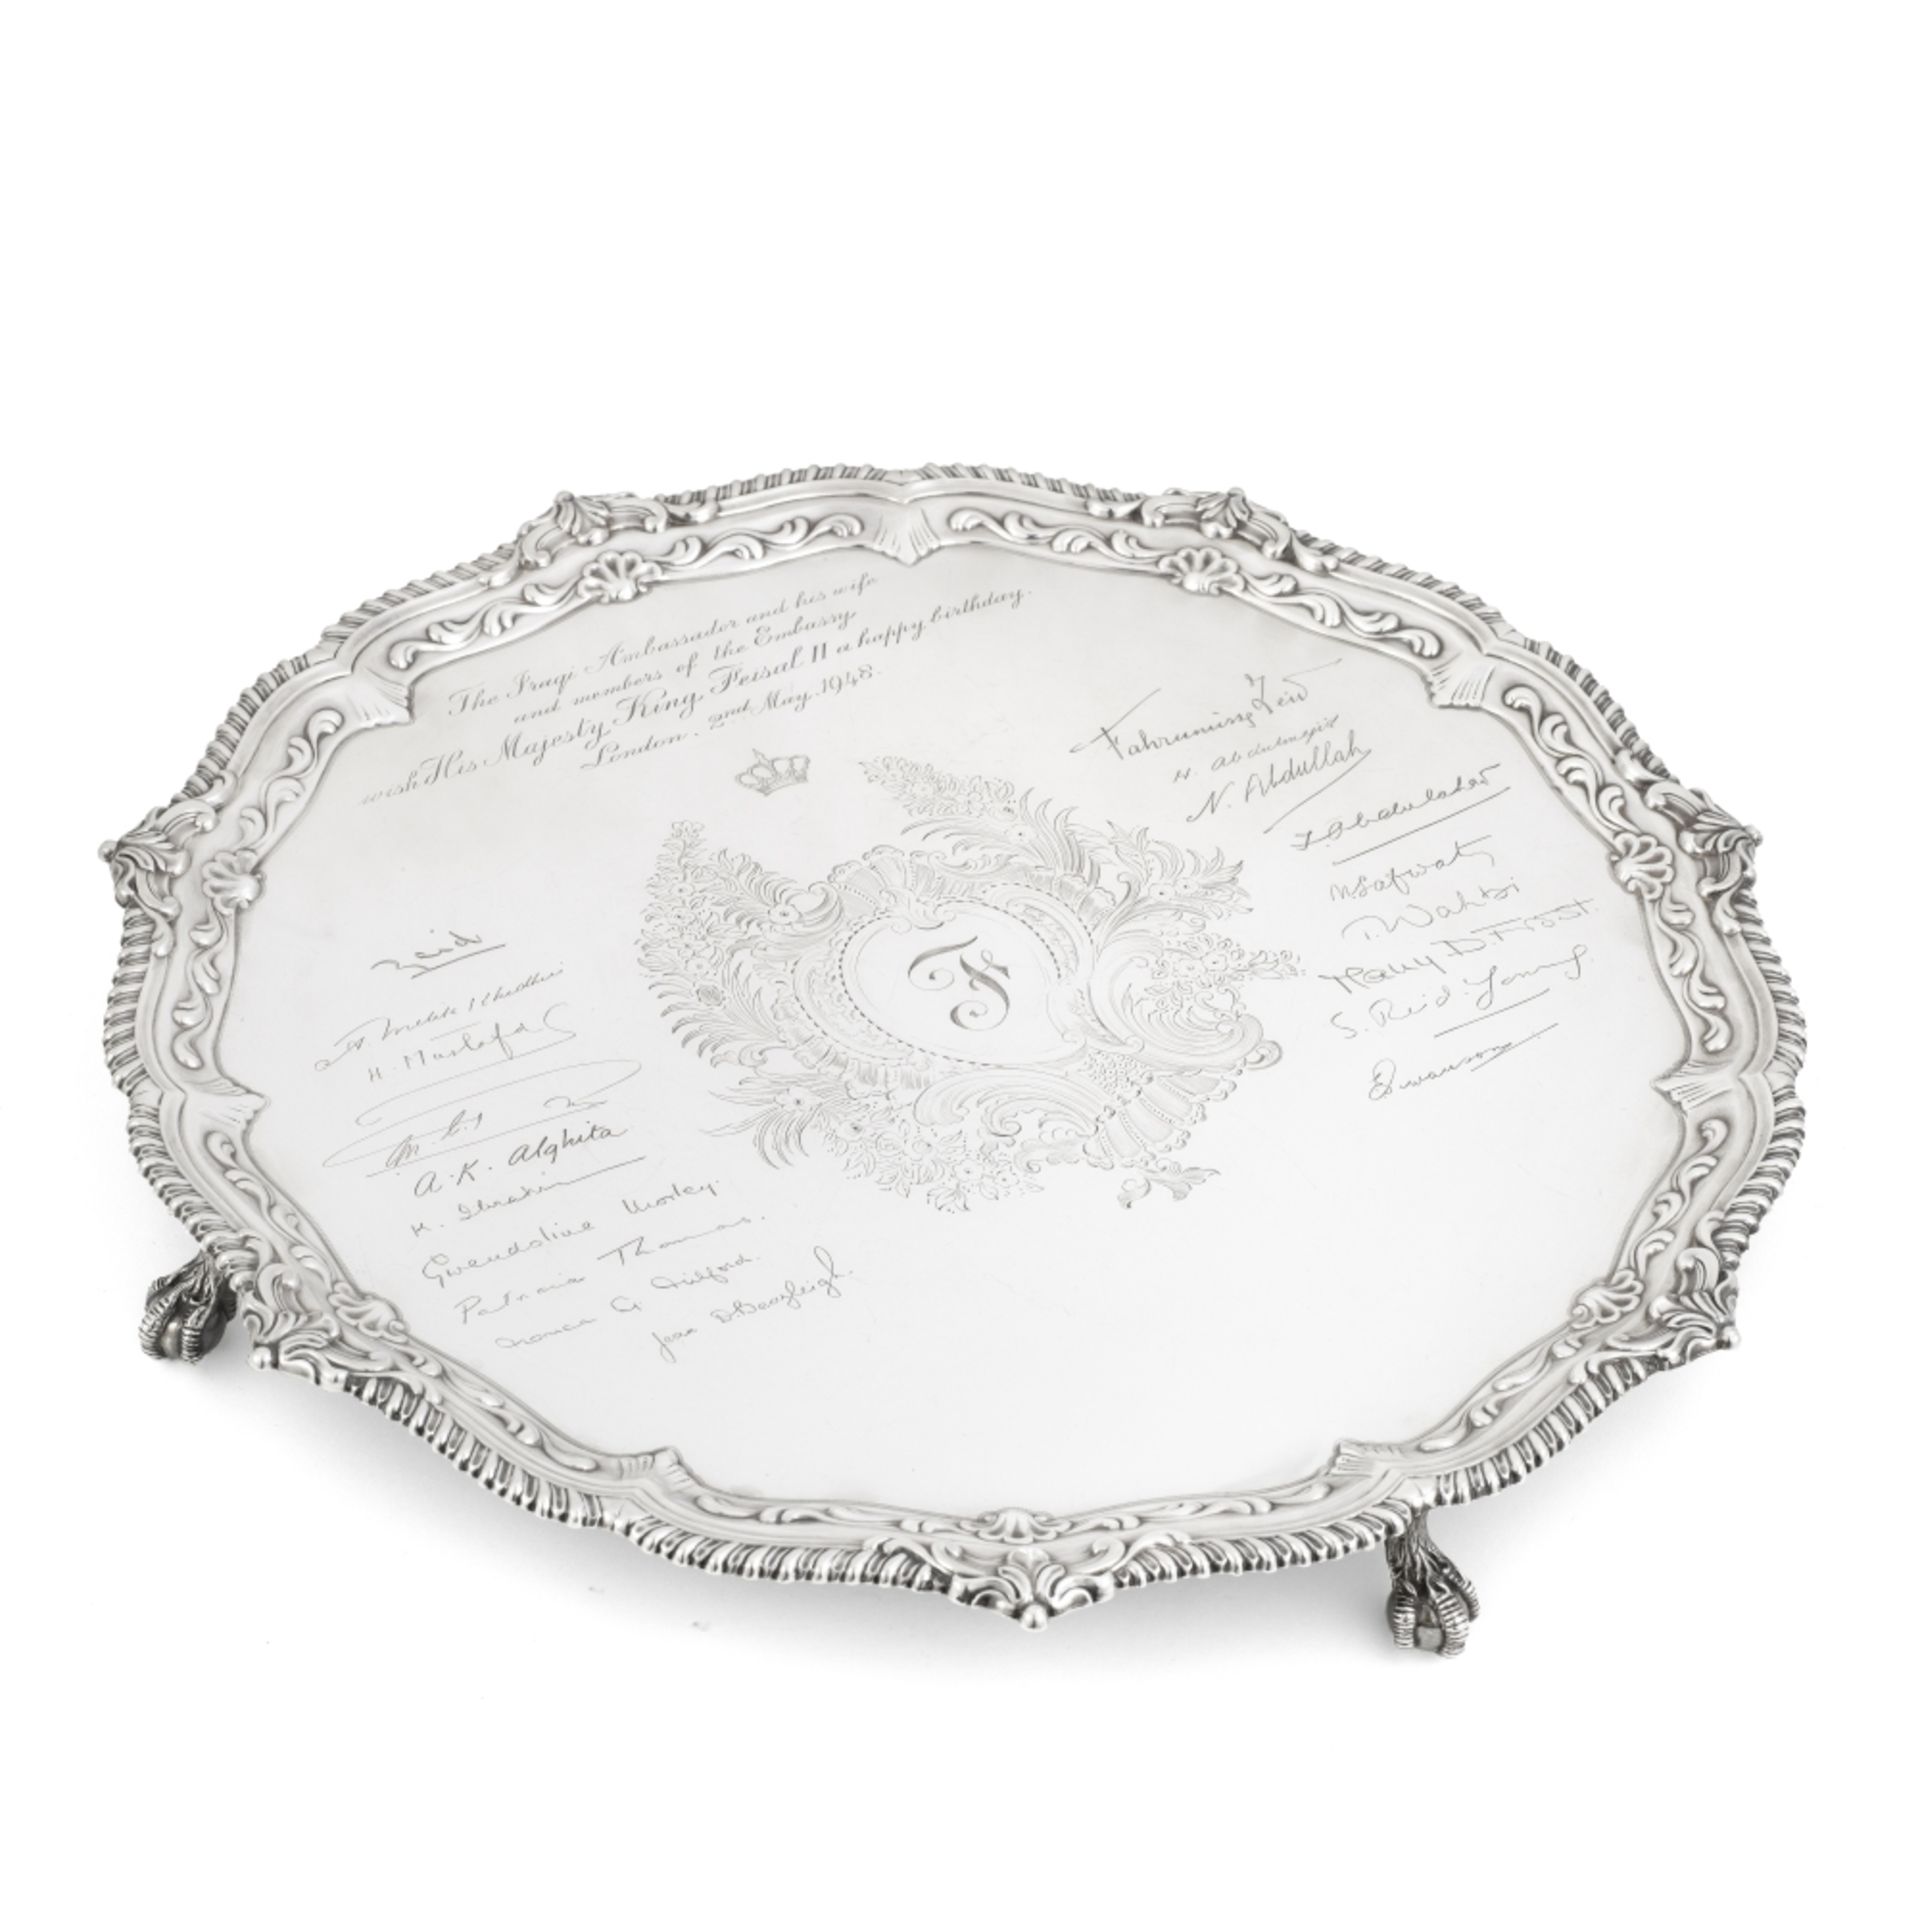 Of Iraqi interest: a large silver salver presented to King Faisal II Martin Hall & Co, Sheffield ...